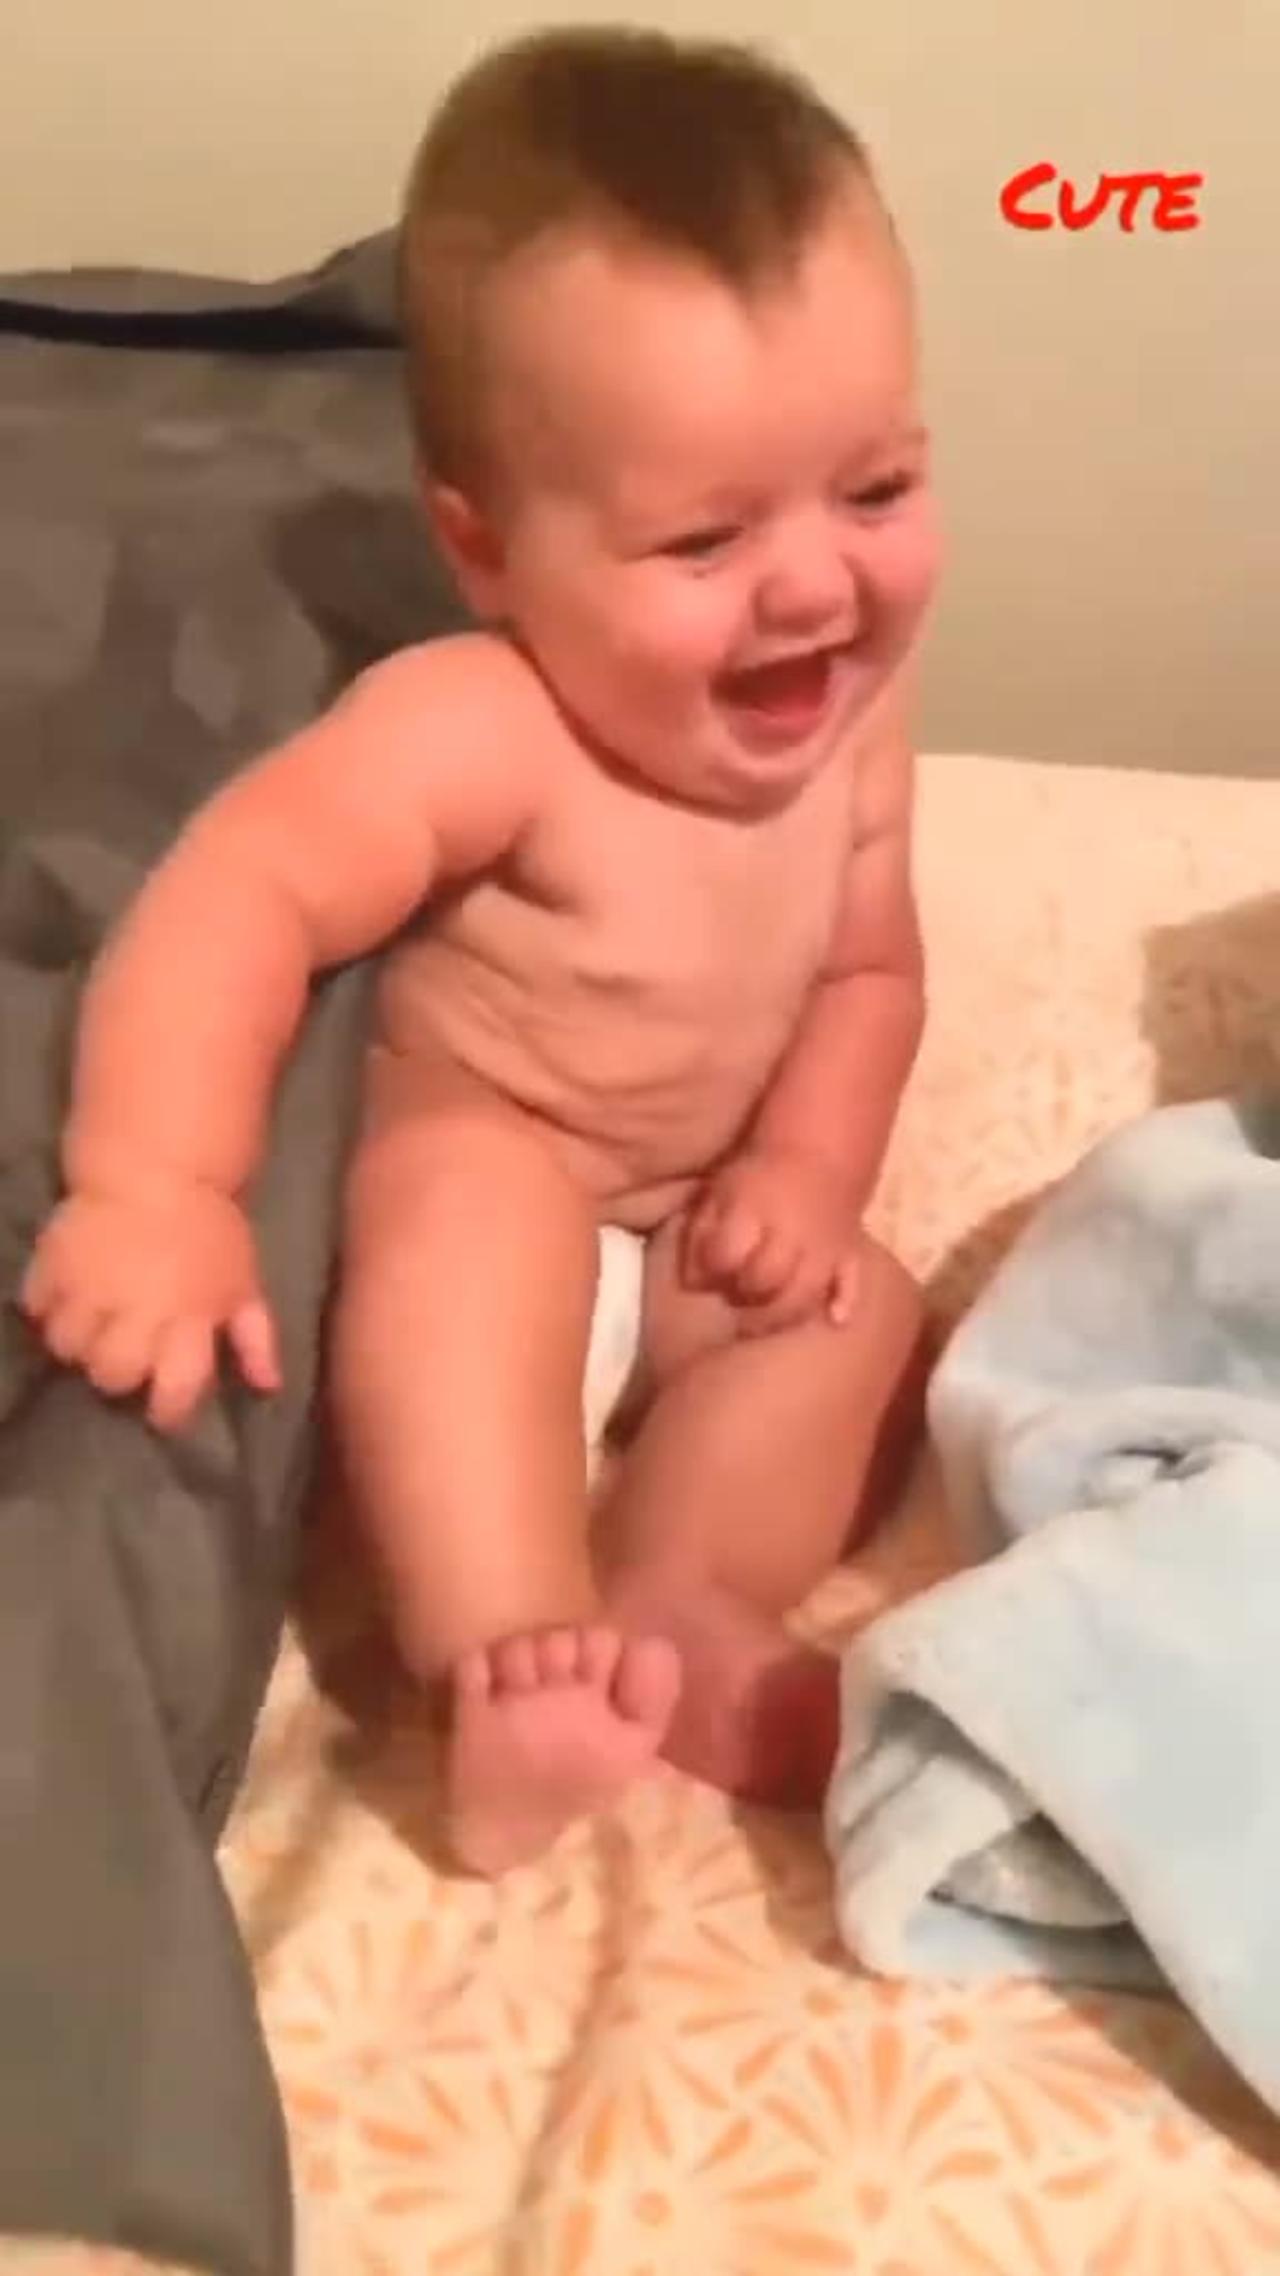 Baby laughing funny video compilation